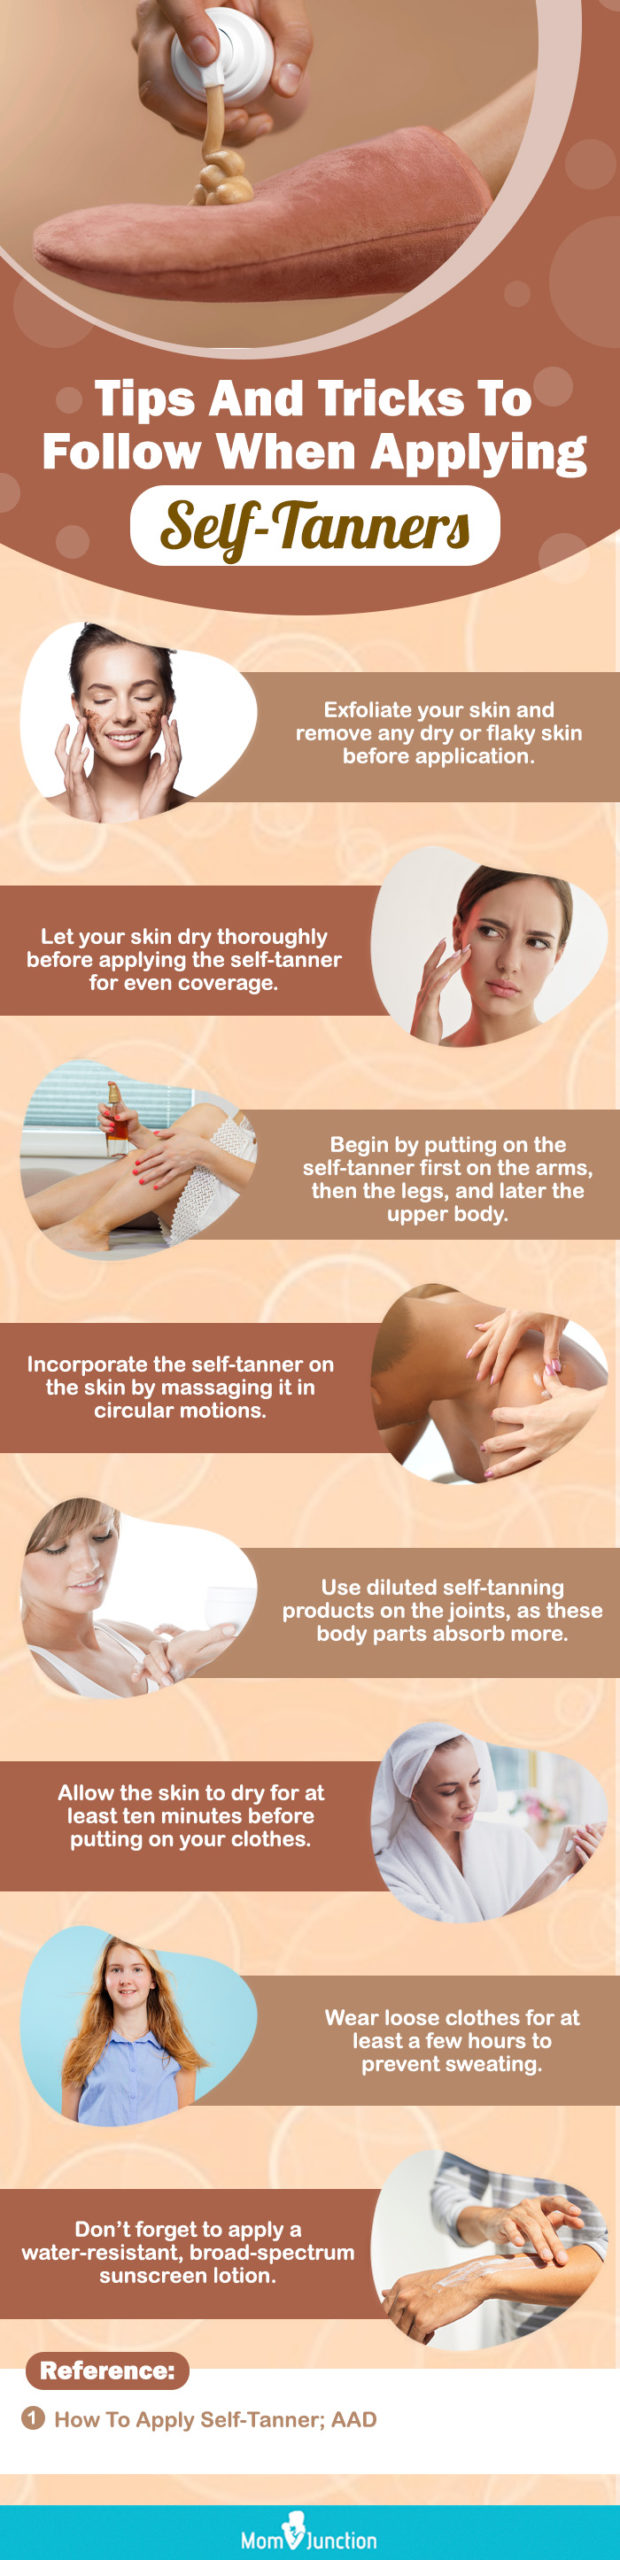 Tips And Tricks To Follow When Applying Self-Tanners (infographic)